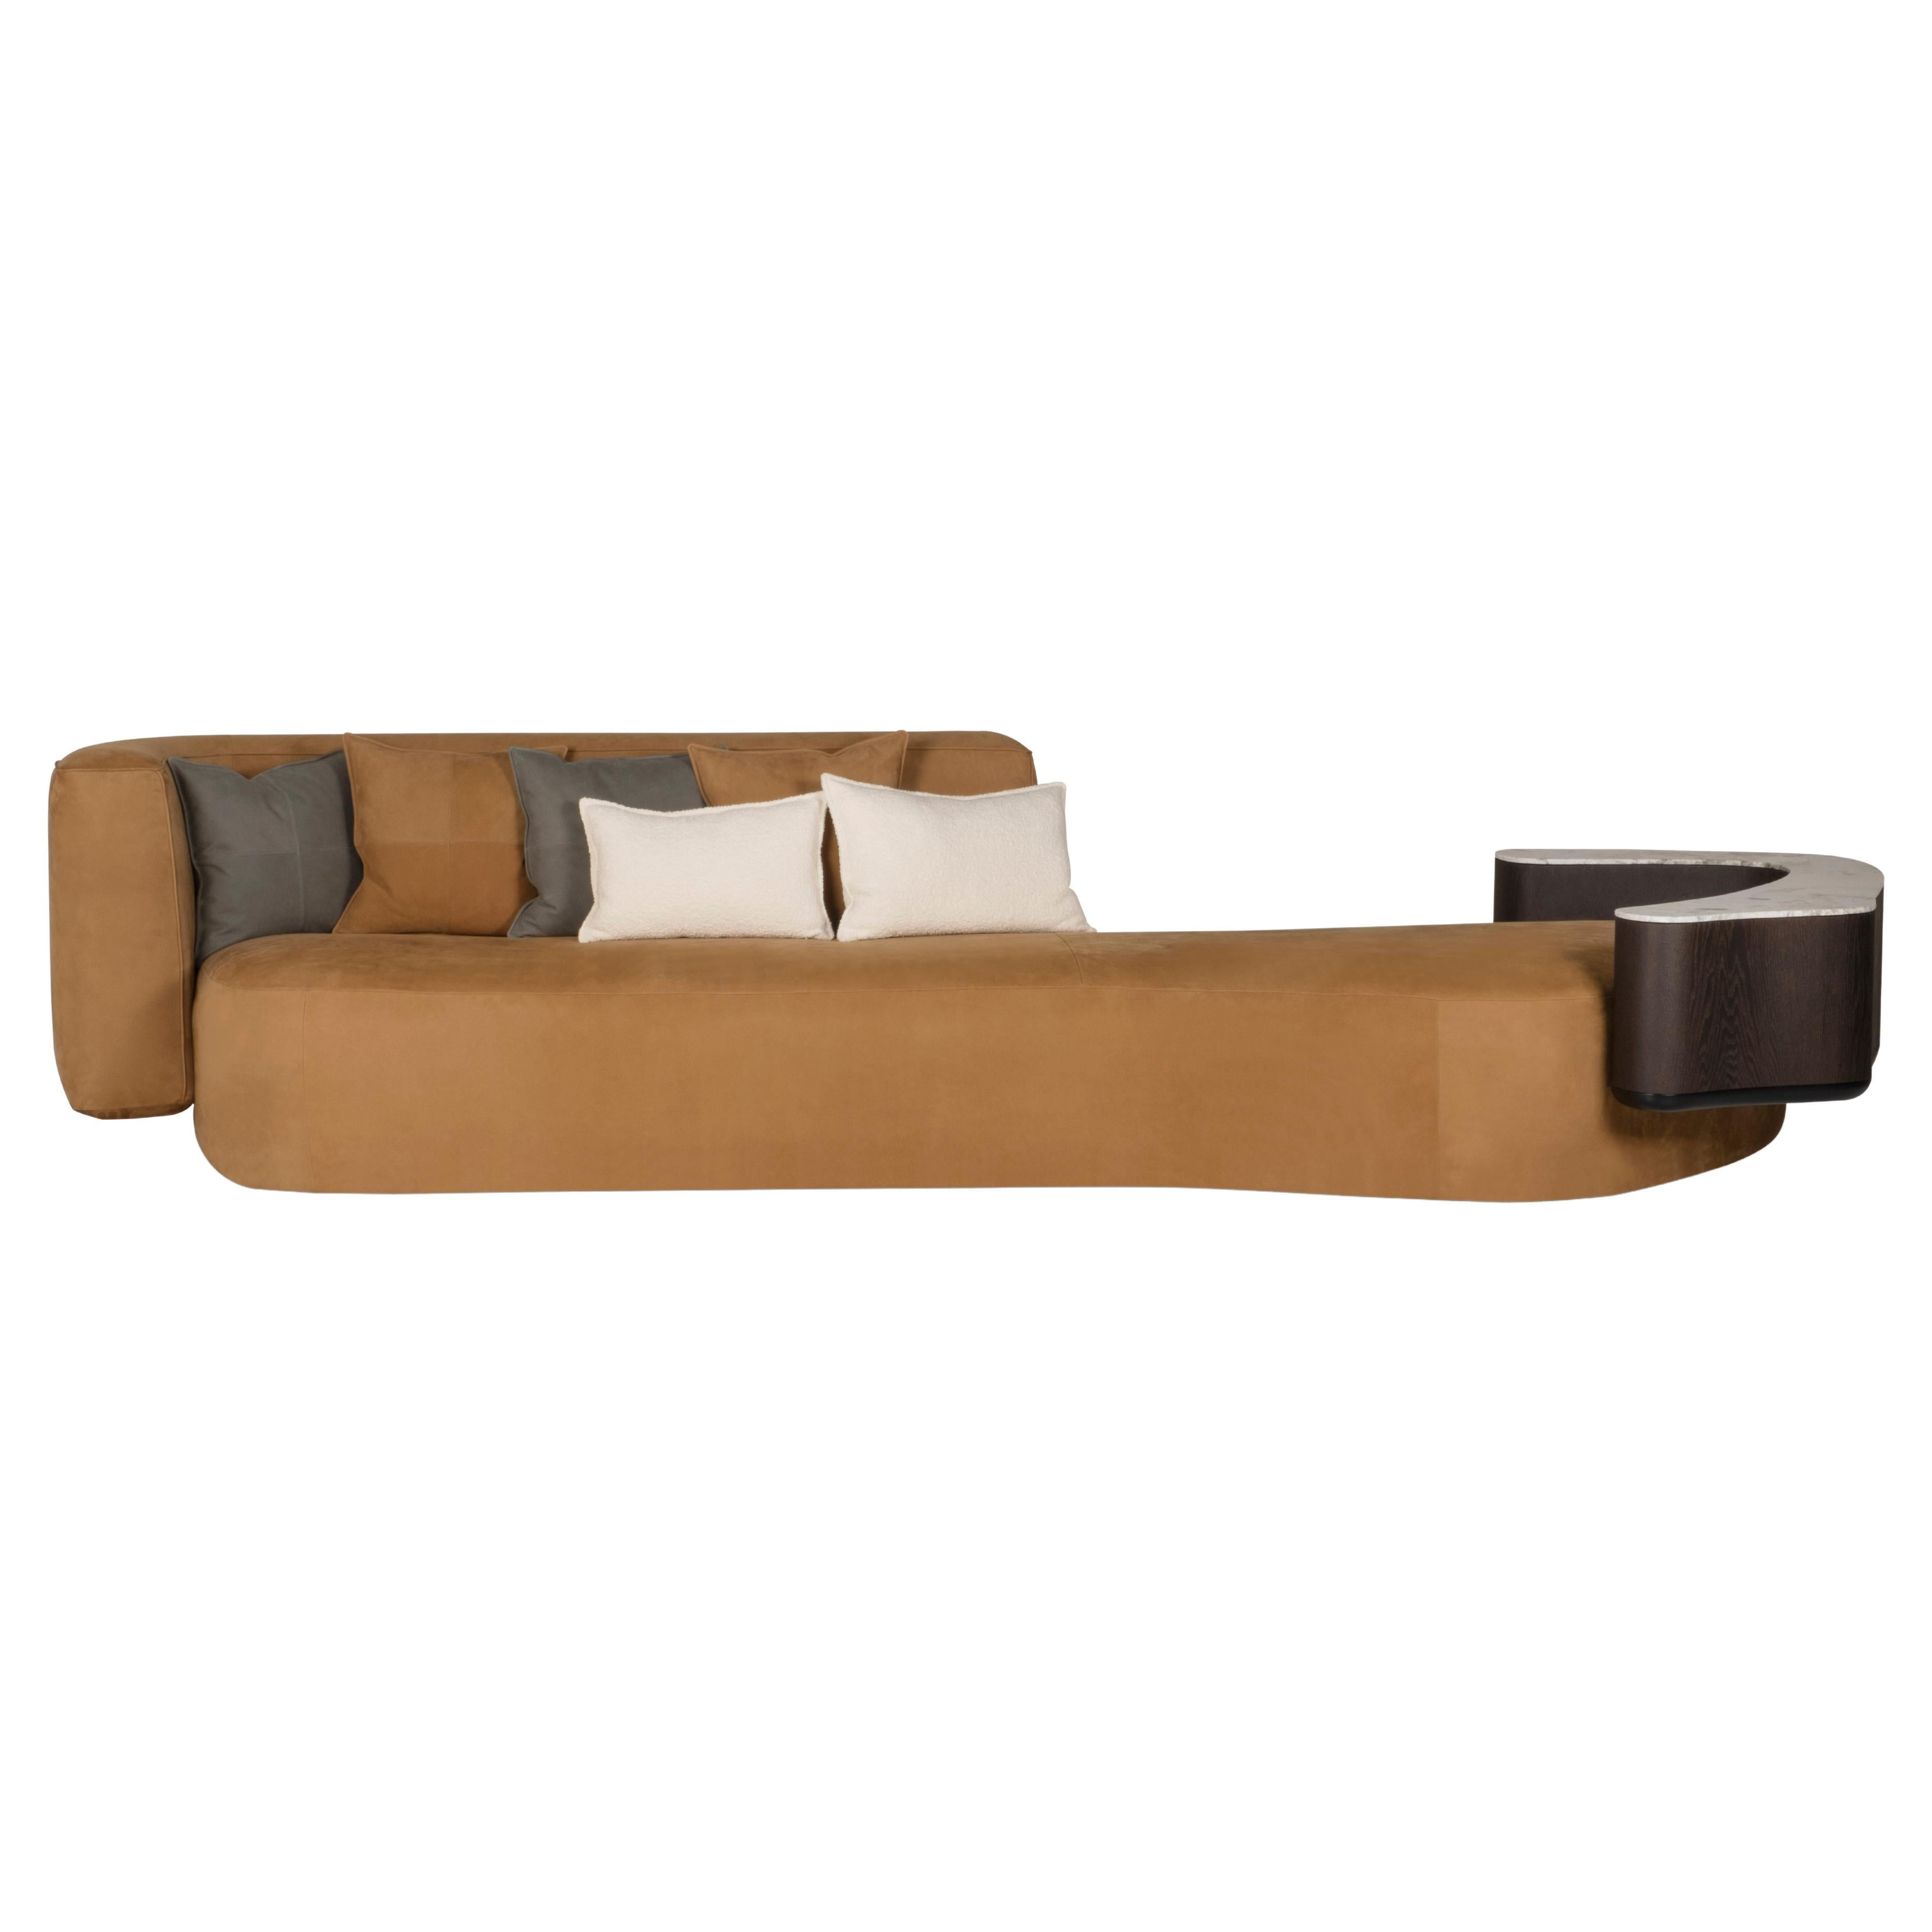 Modern Galapinhos Sofa, Caramel Leather, Handmade in Portugal by Greenapple For Sale